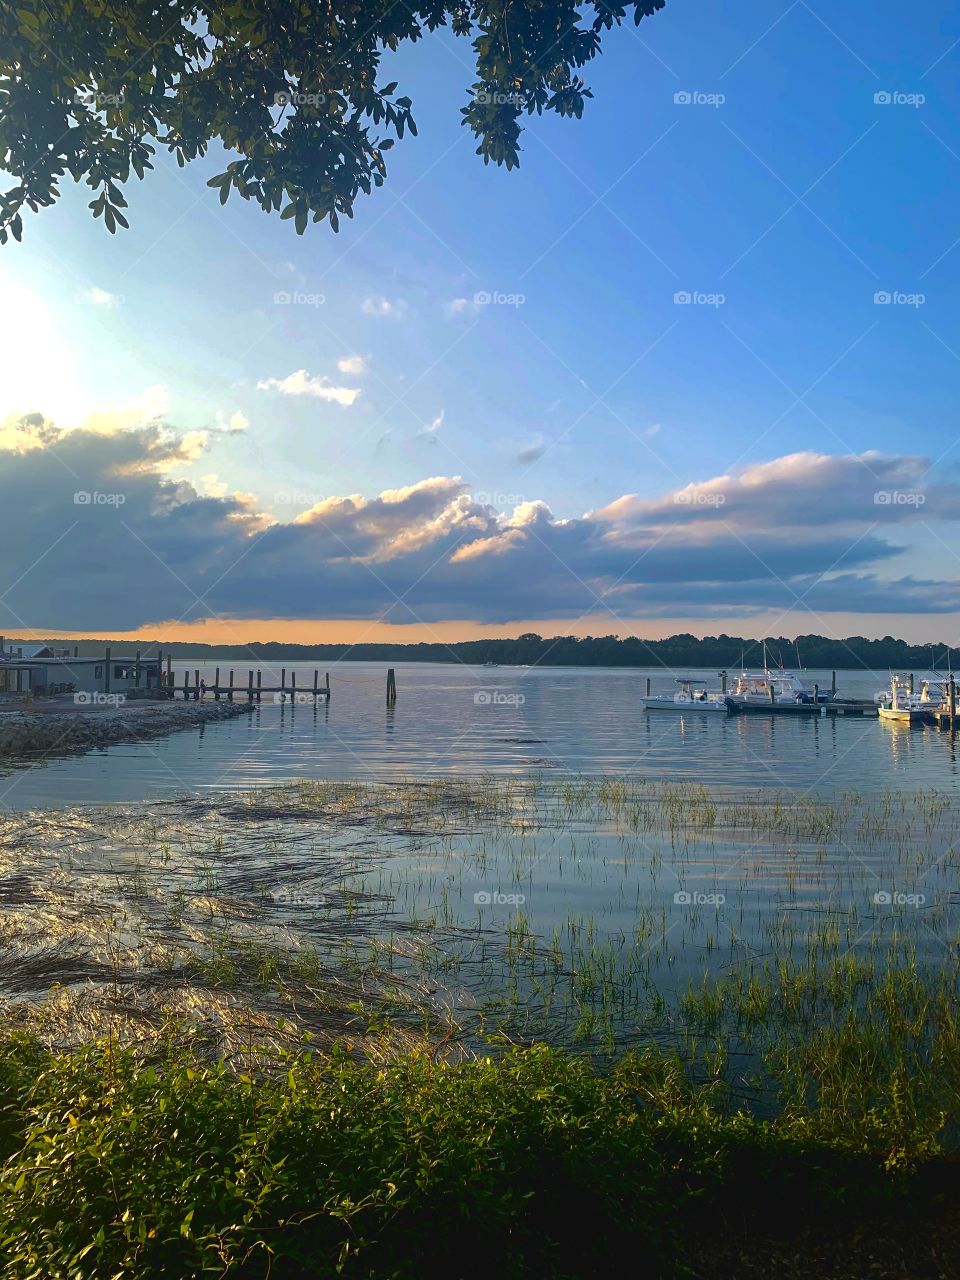 Body of water with weeds growing at the shore and many floating on top with a dock and the sun starting to set in a blue sky. 